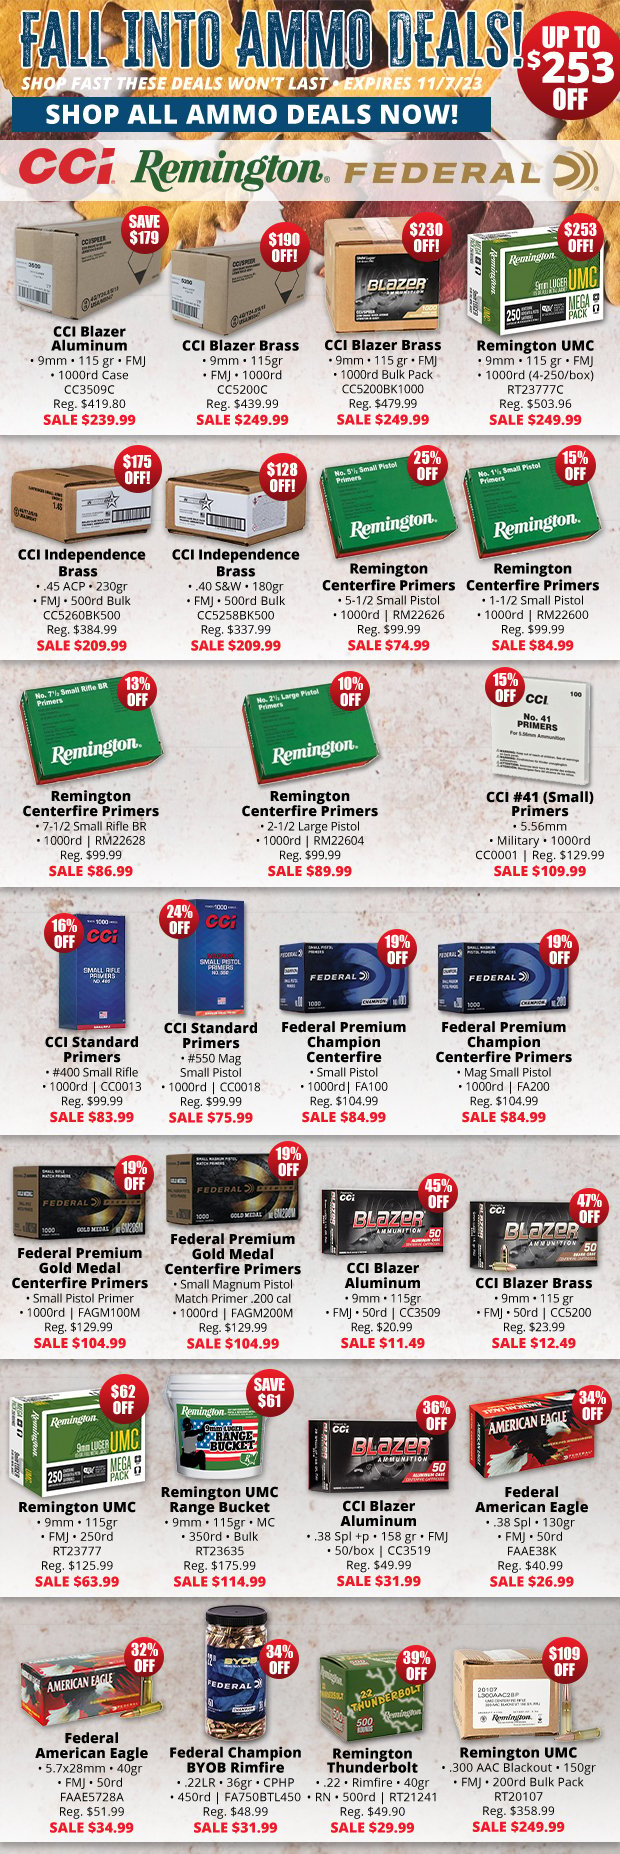 Up to $253 Off Ammo!